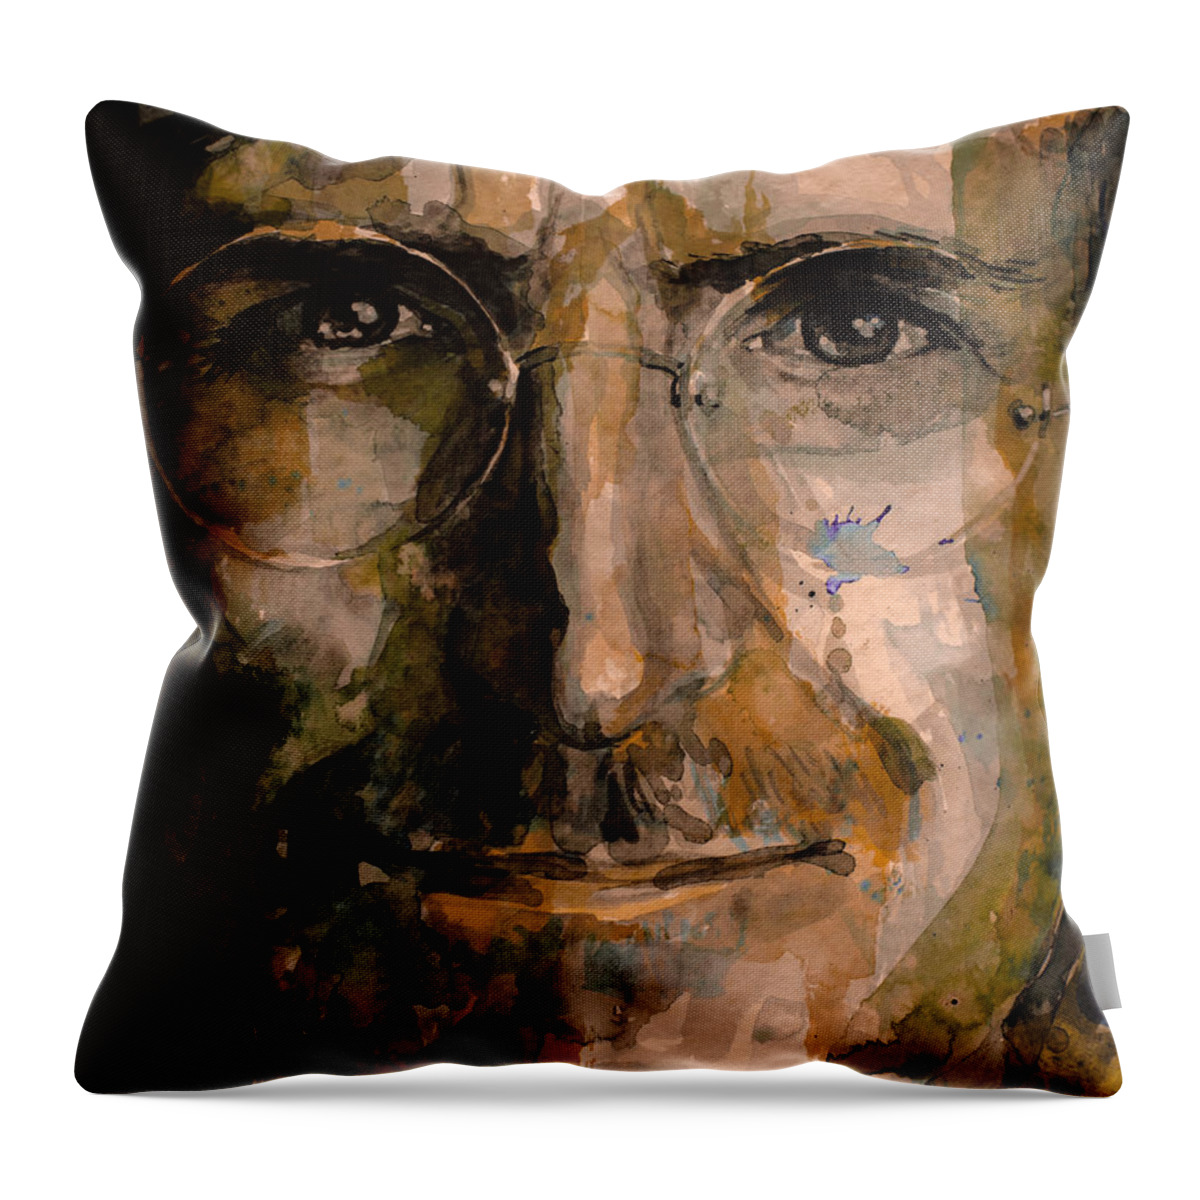 Steve Jobs Throw Pillow featuring the painting Steve... by Laur Iduc